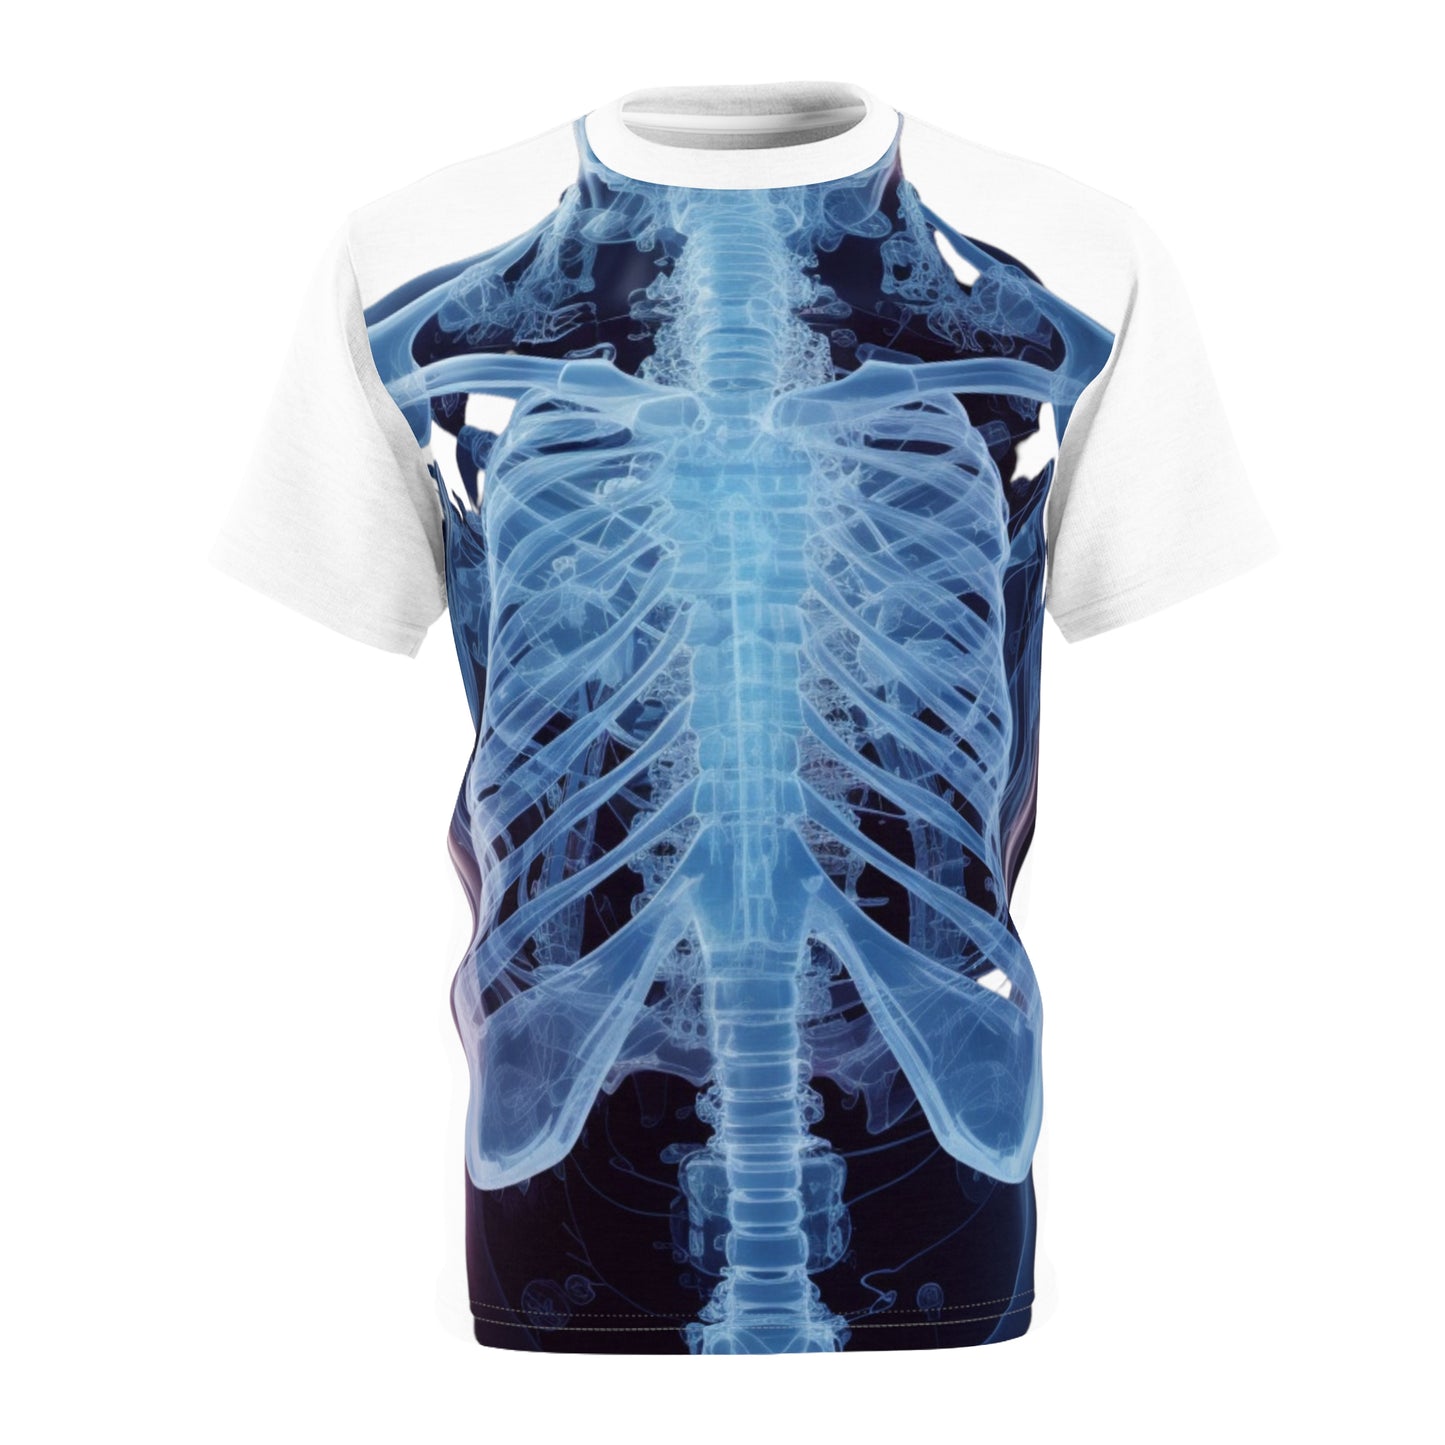 Wear Art with Our Torsion Human Body X-Ray All Over Print T-Shirt - Unique and Strikingly Detailed Design for Medical and Art Enthusiasts! All Over Prints White stitching 4 oz. S